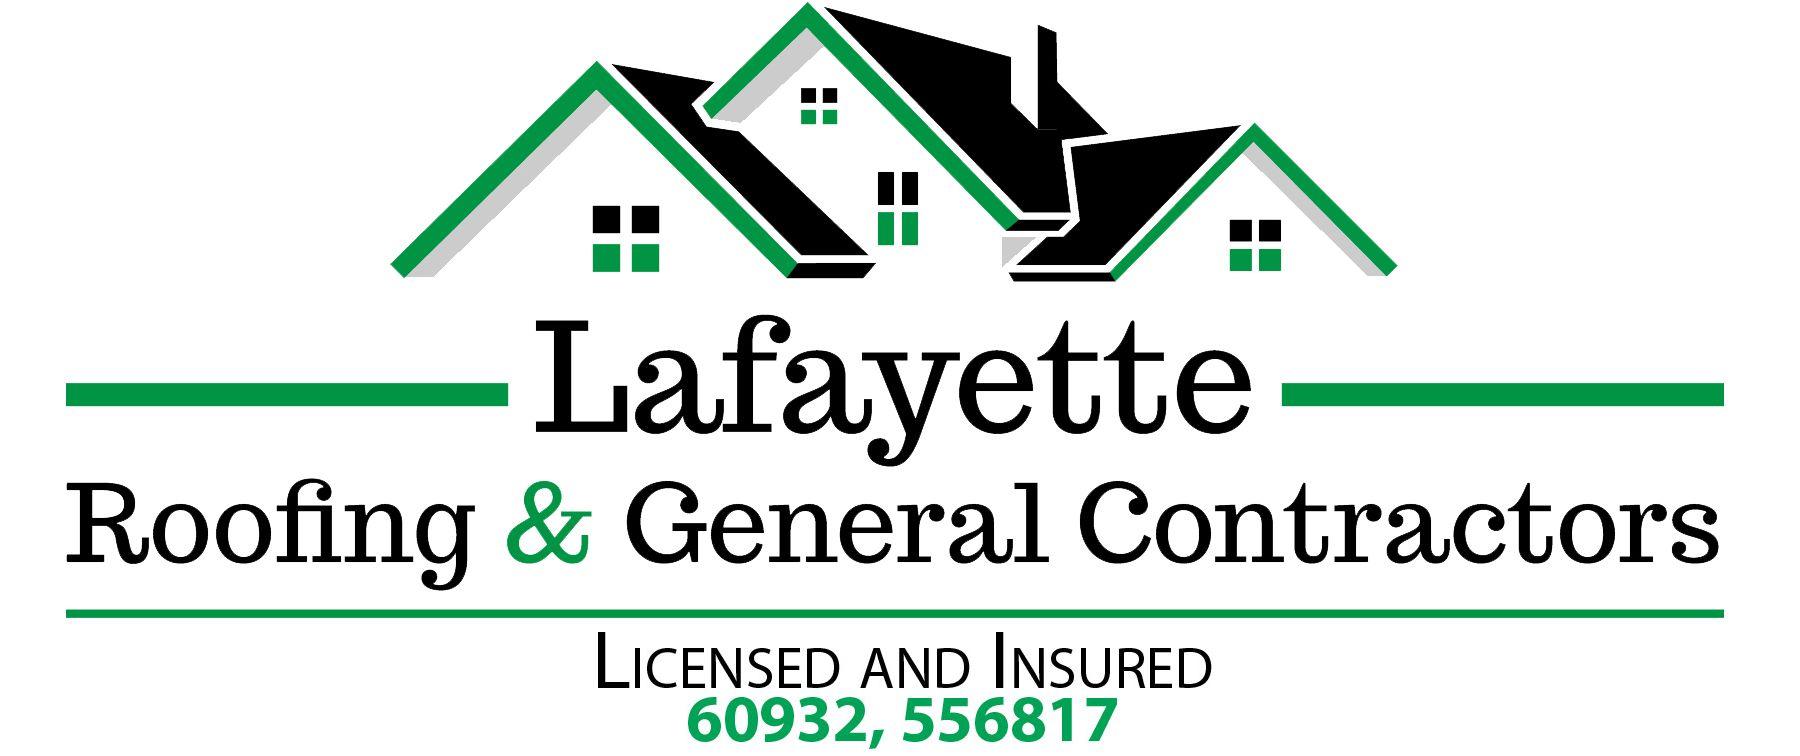 Home Roof Logo - Roofing Contractor & Roof Repair. Lafayette, LA. Lafayette Roofing